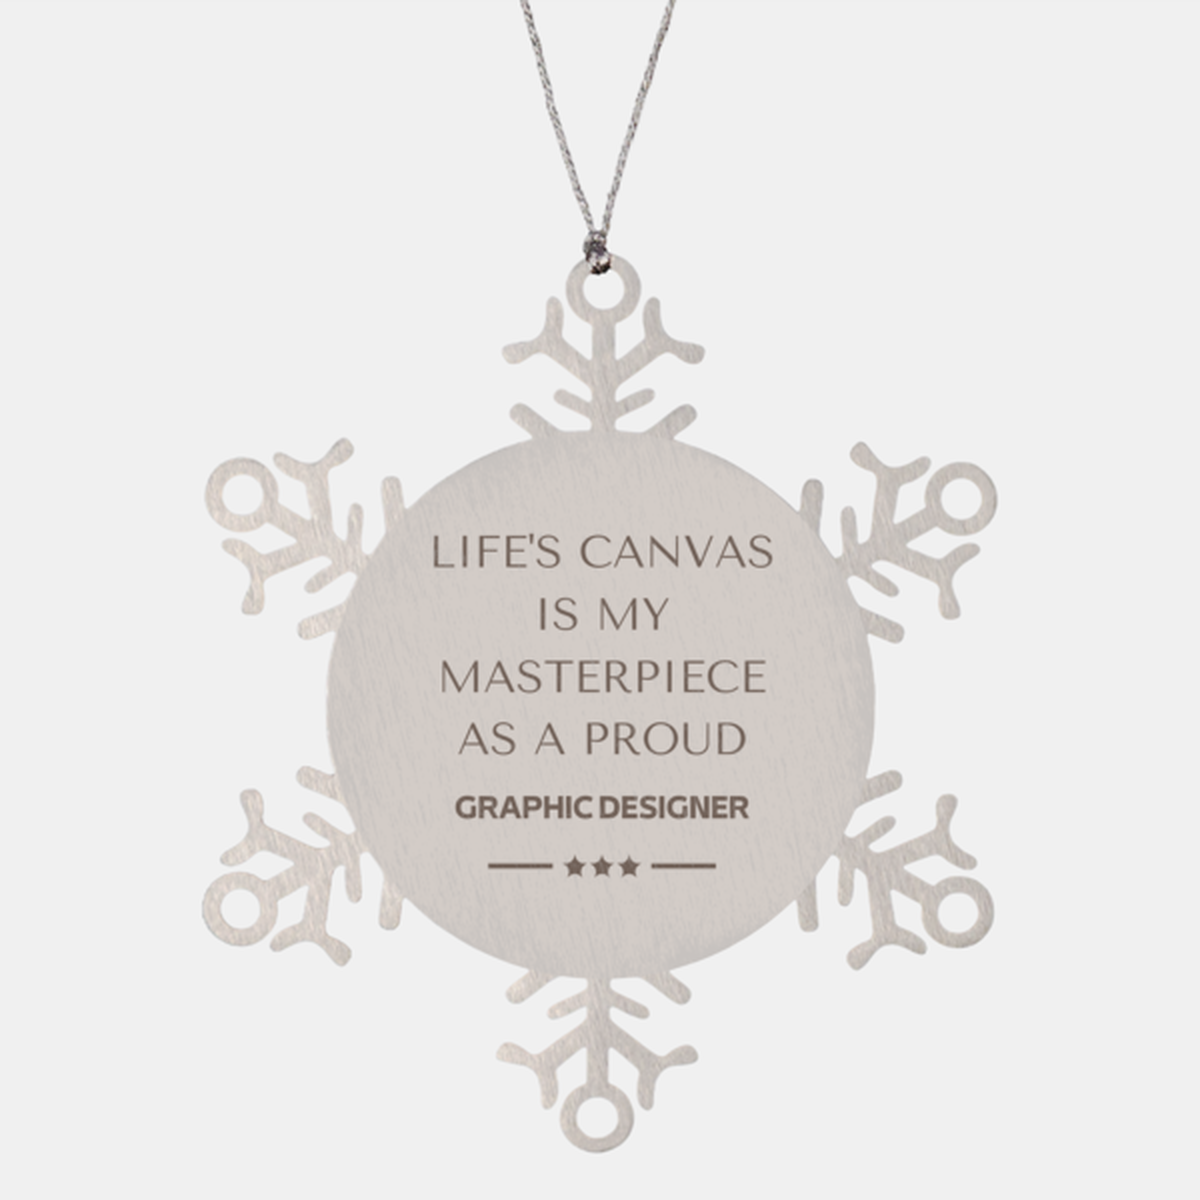 Proud Graphic Designer Gifts, Life's canvas is my masterpiece, Epic Birthday Christmas Unique Snowflake Ornament For Graphic Designer, Coworkers, Men, Women, Friends